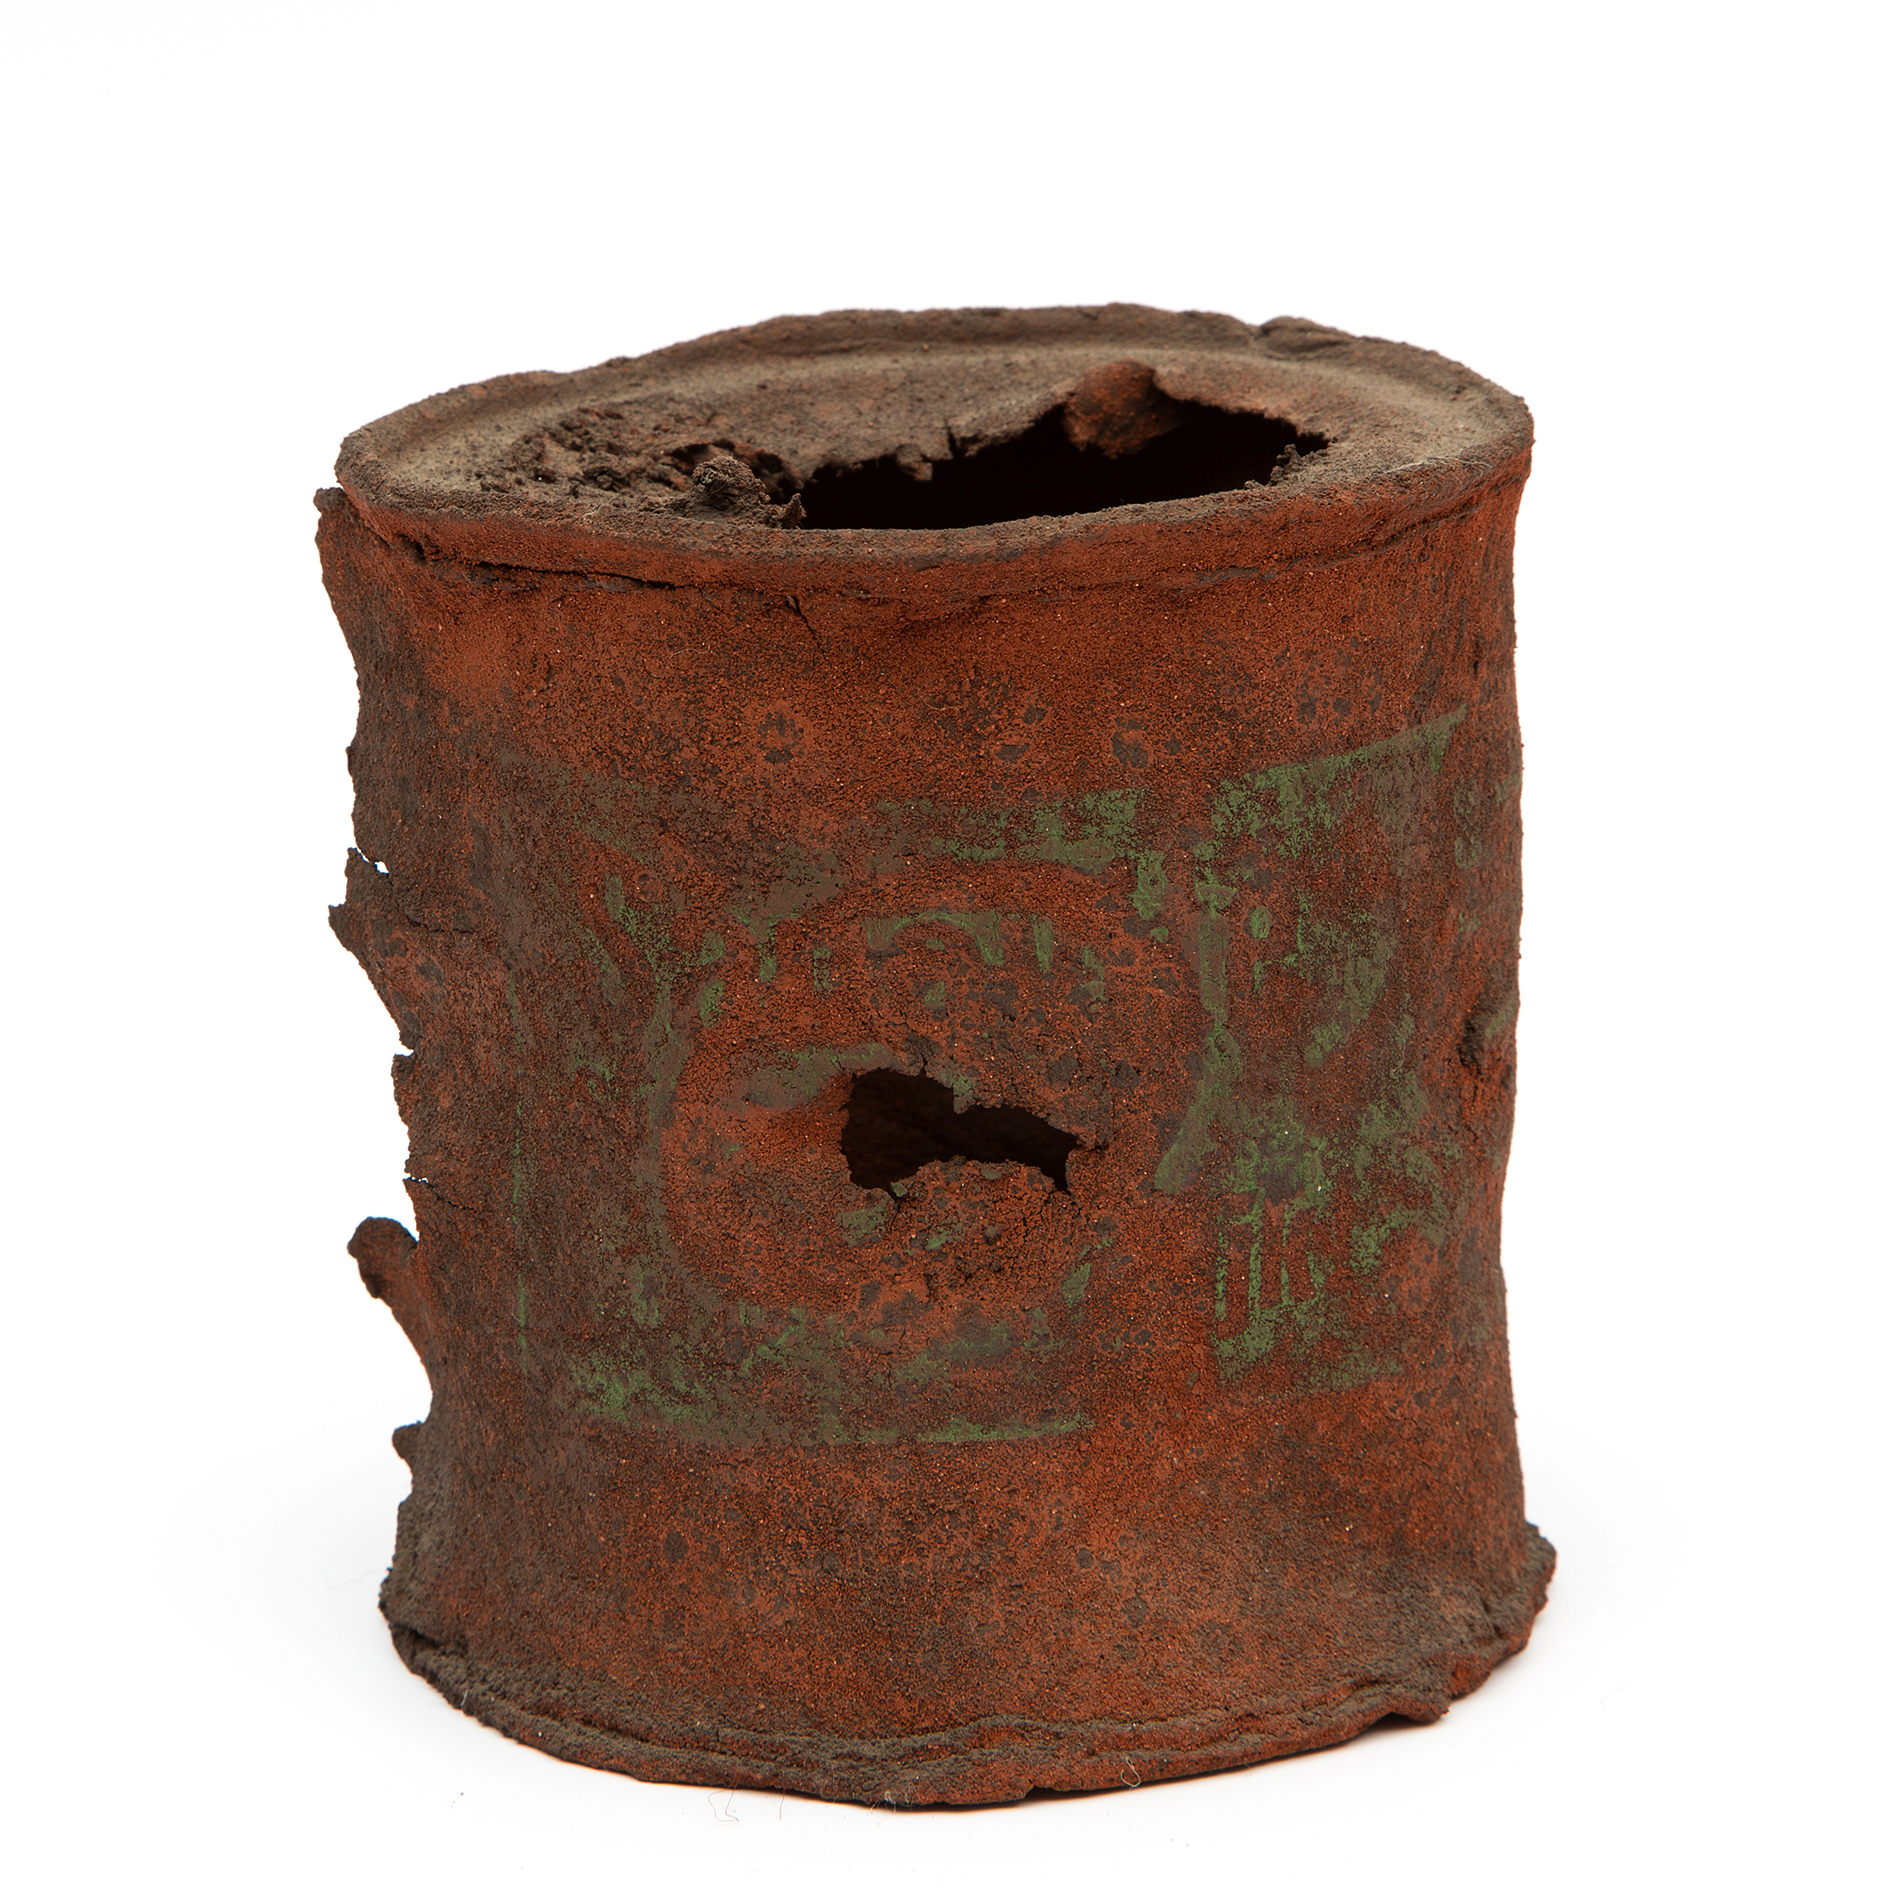 Ceramic barrel shaped form with rusty surface